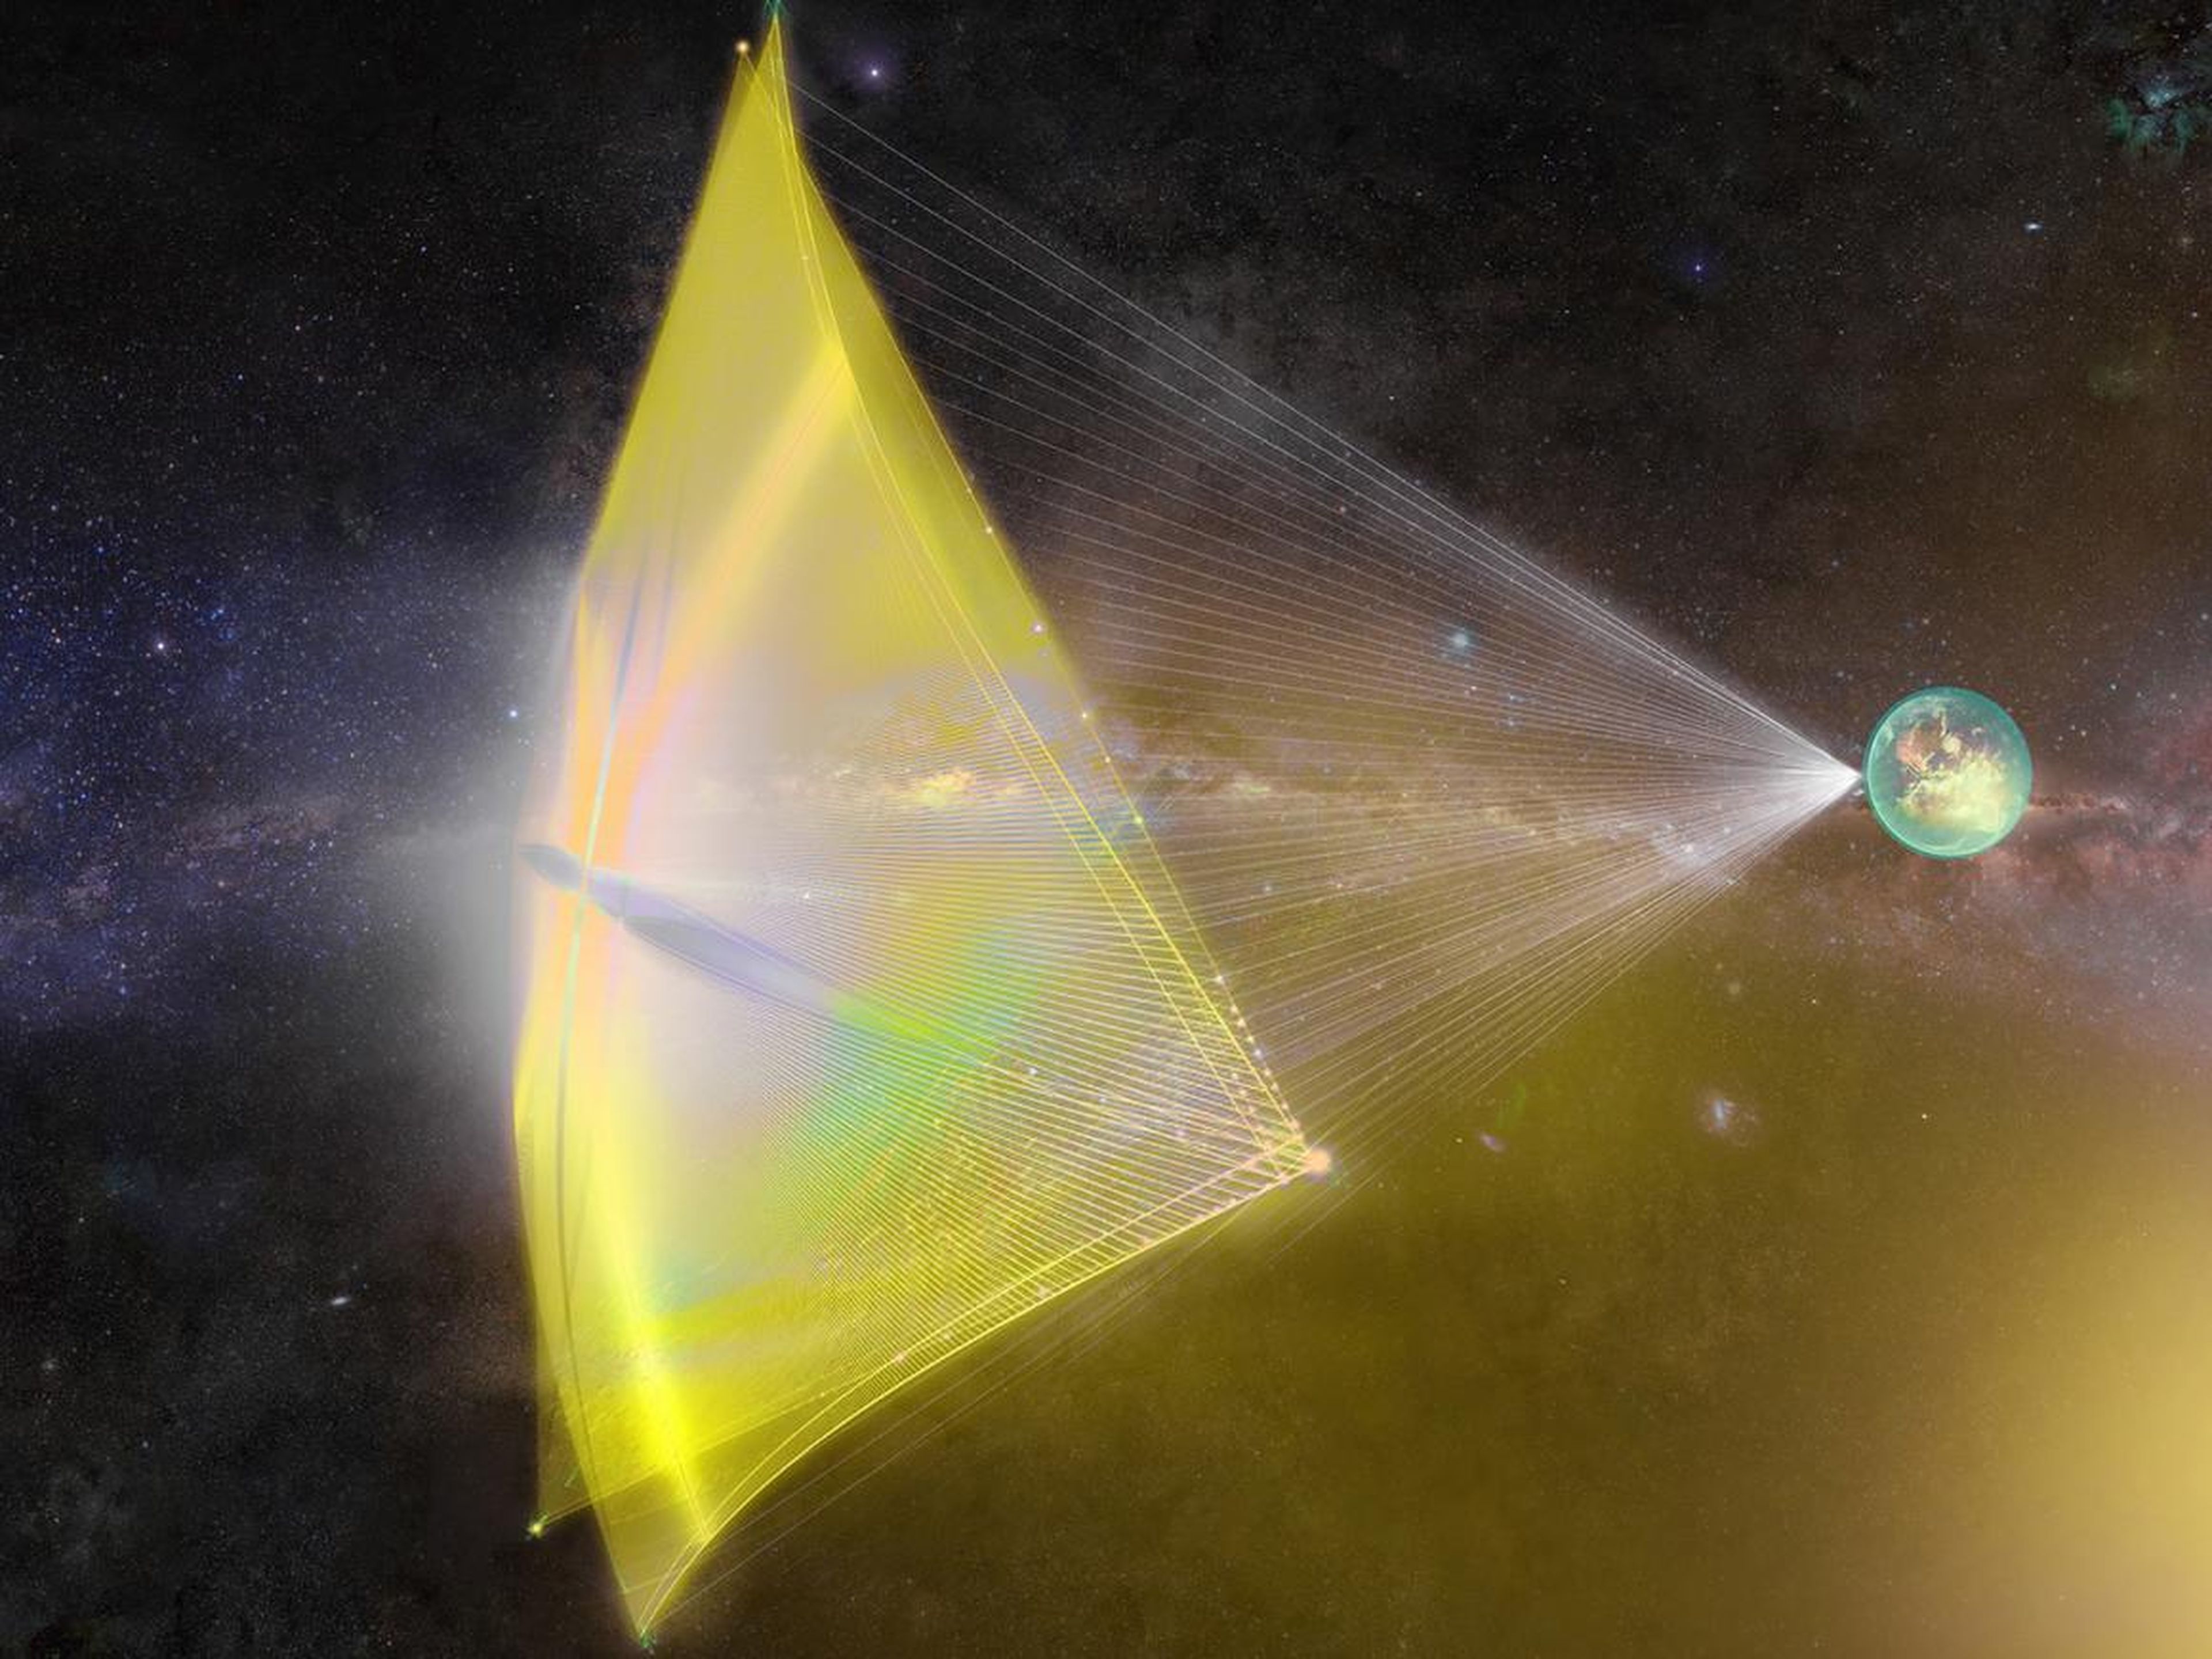 An illustration of a Breakthrough Starshot "nanocraft" being propelled toward the Alpha Centauri star system with a powerful laser beam.